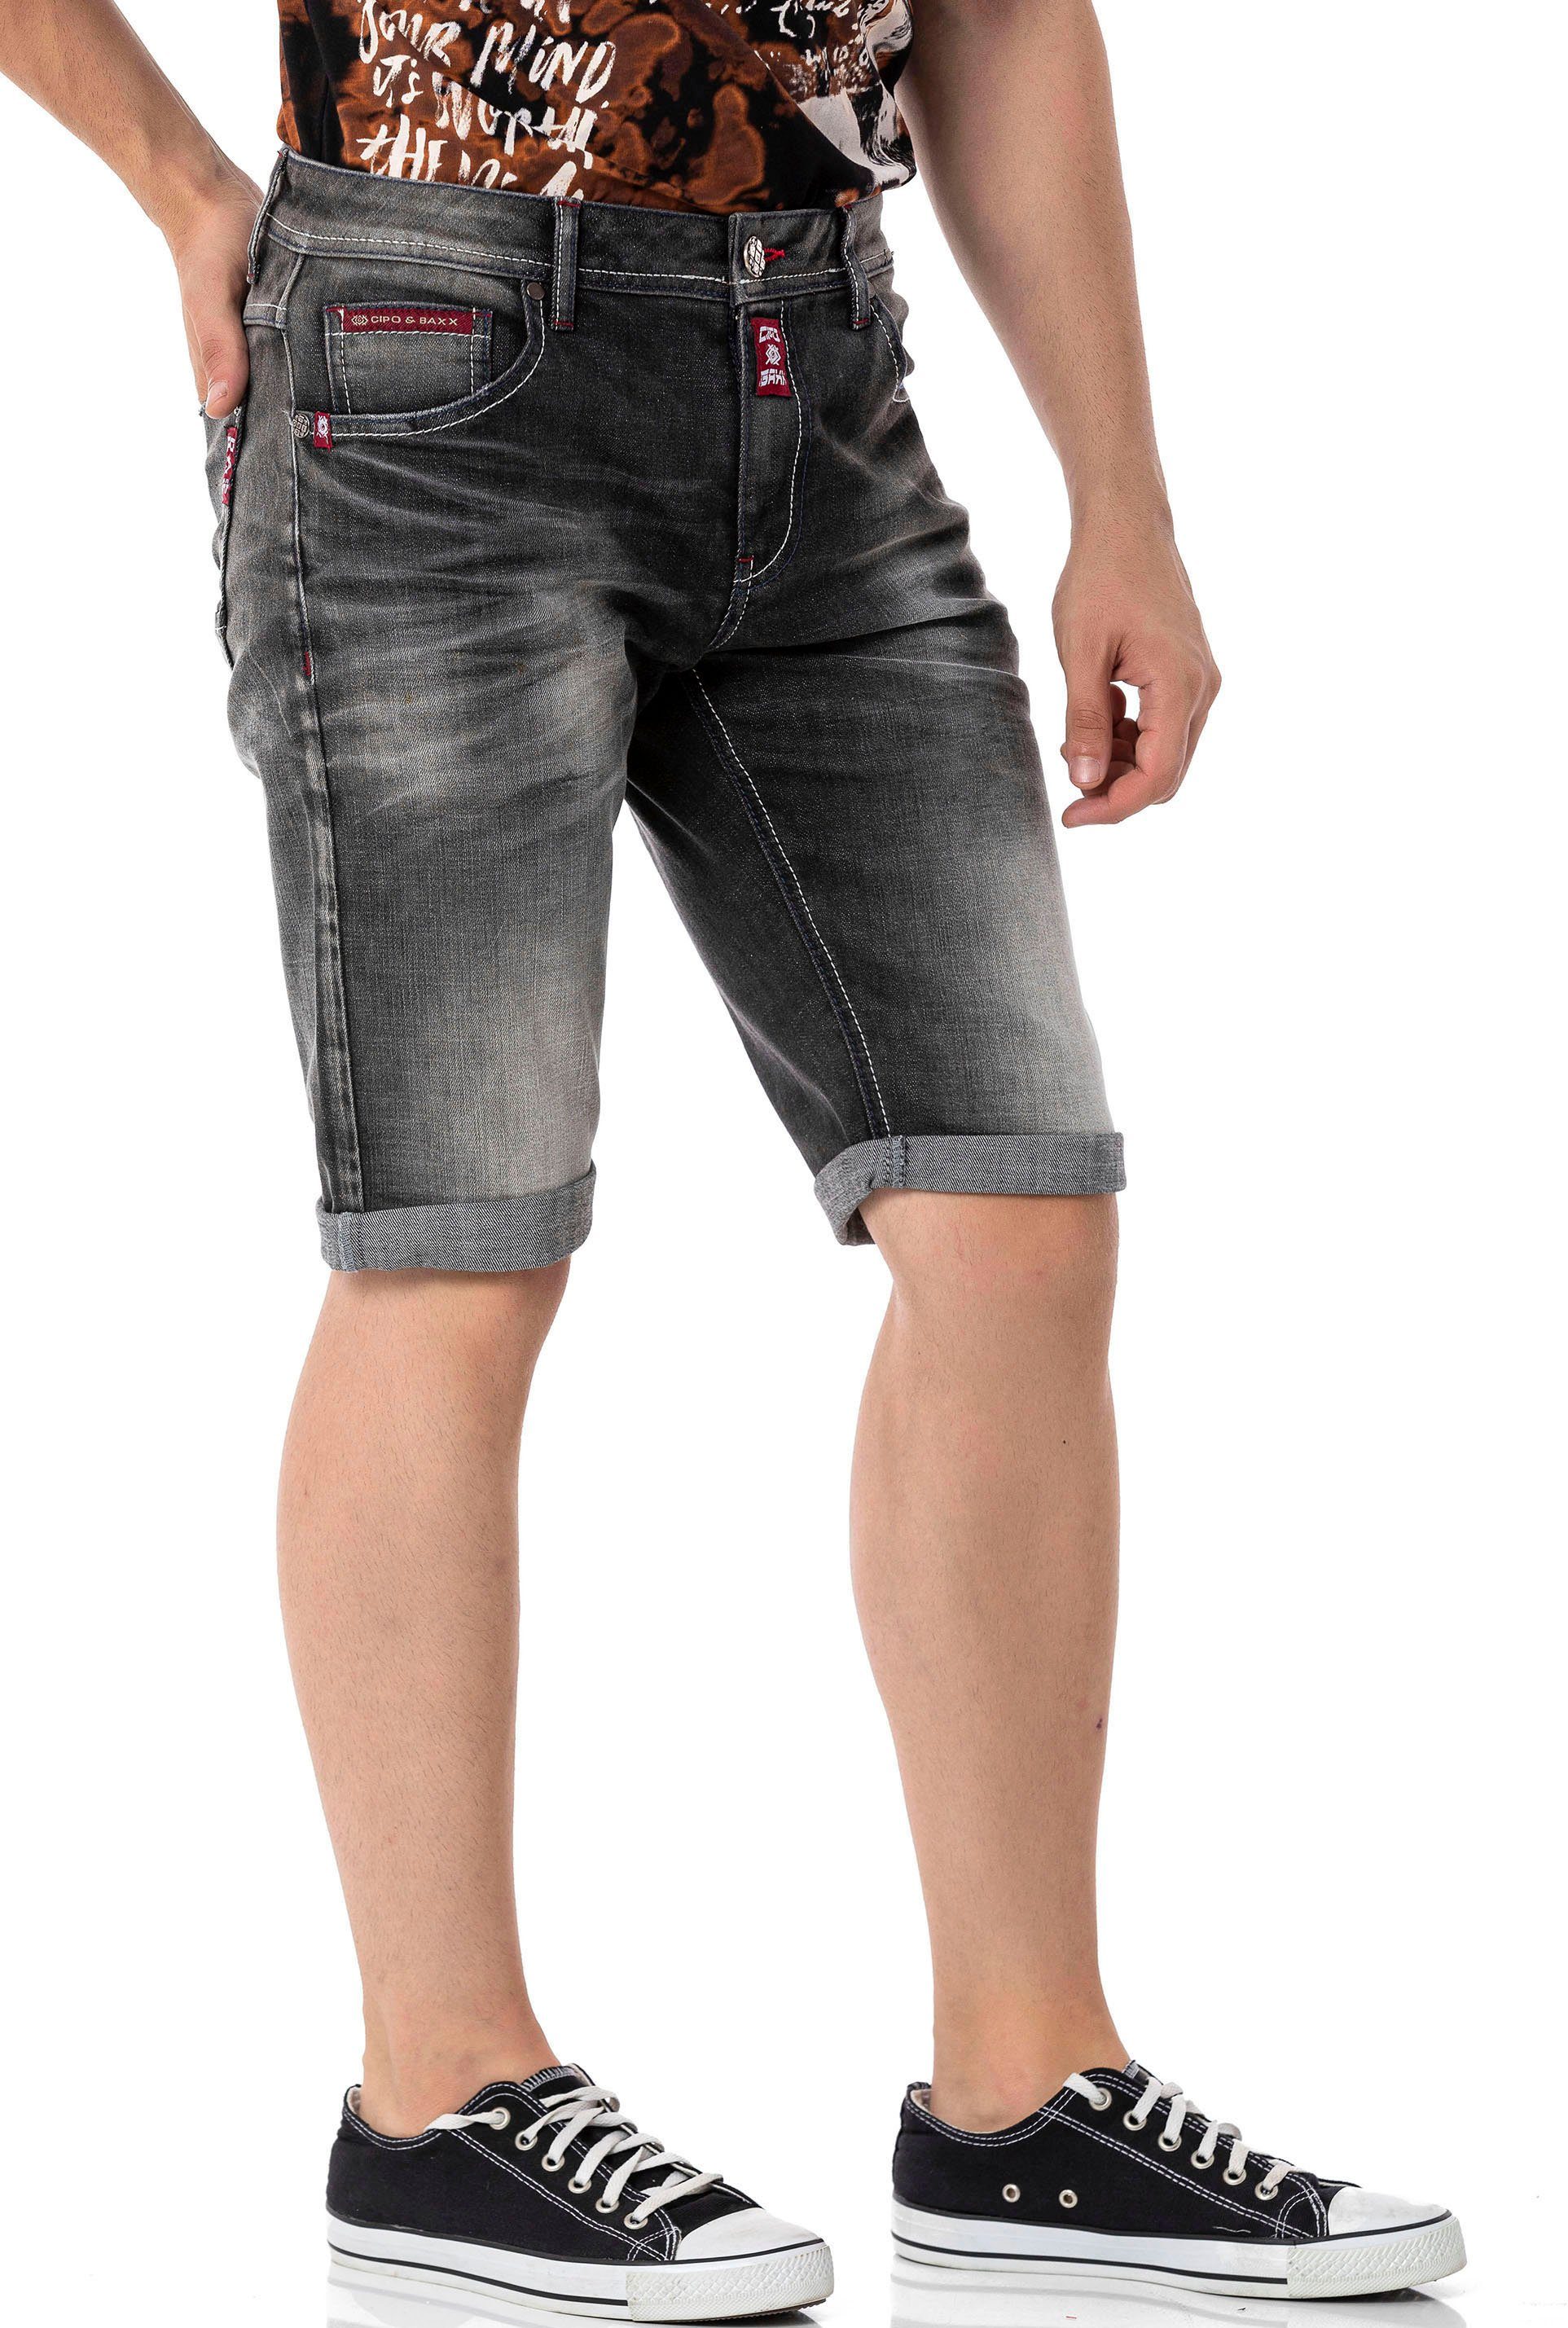 black & used Jeansshorts Cipo Baxx